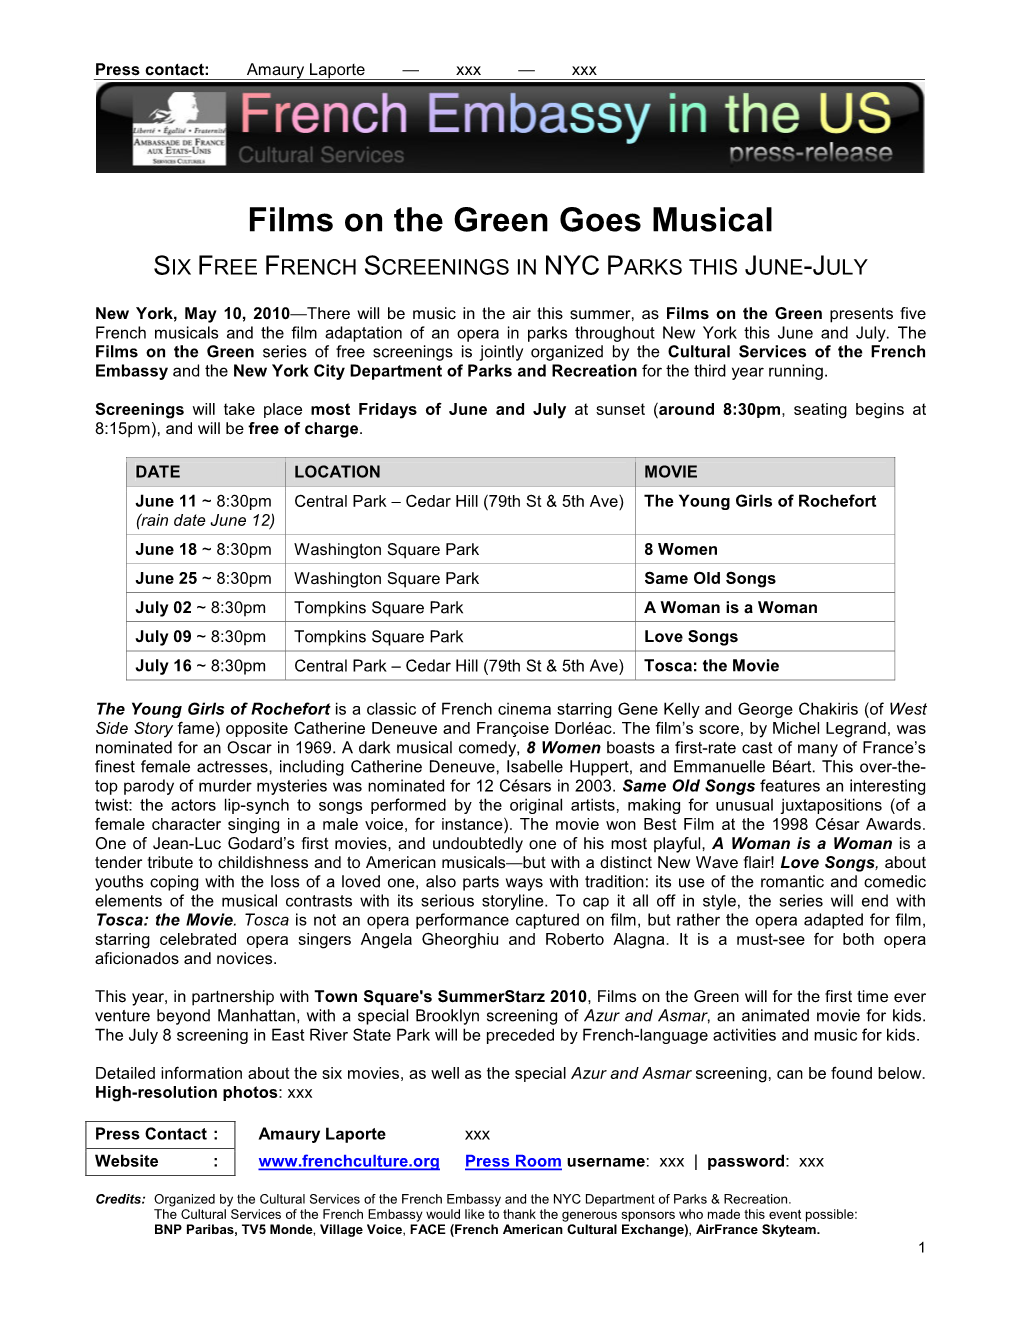 Films on the Green Goes Musical